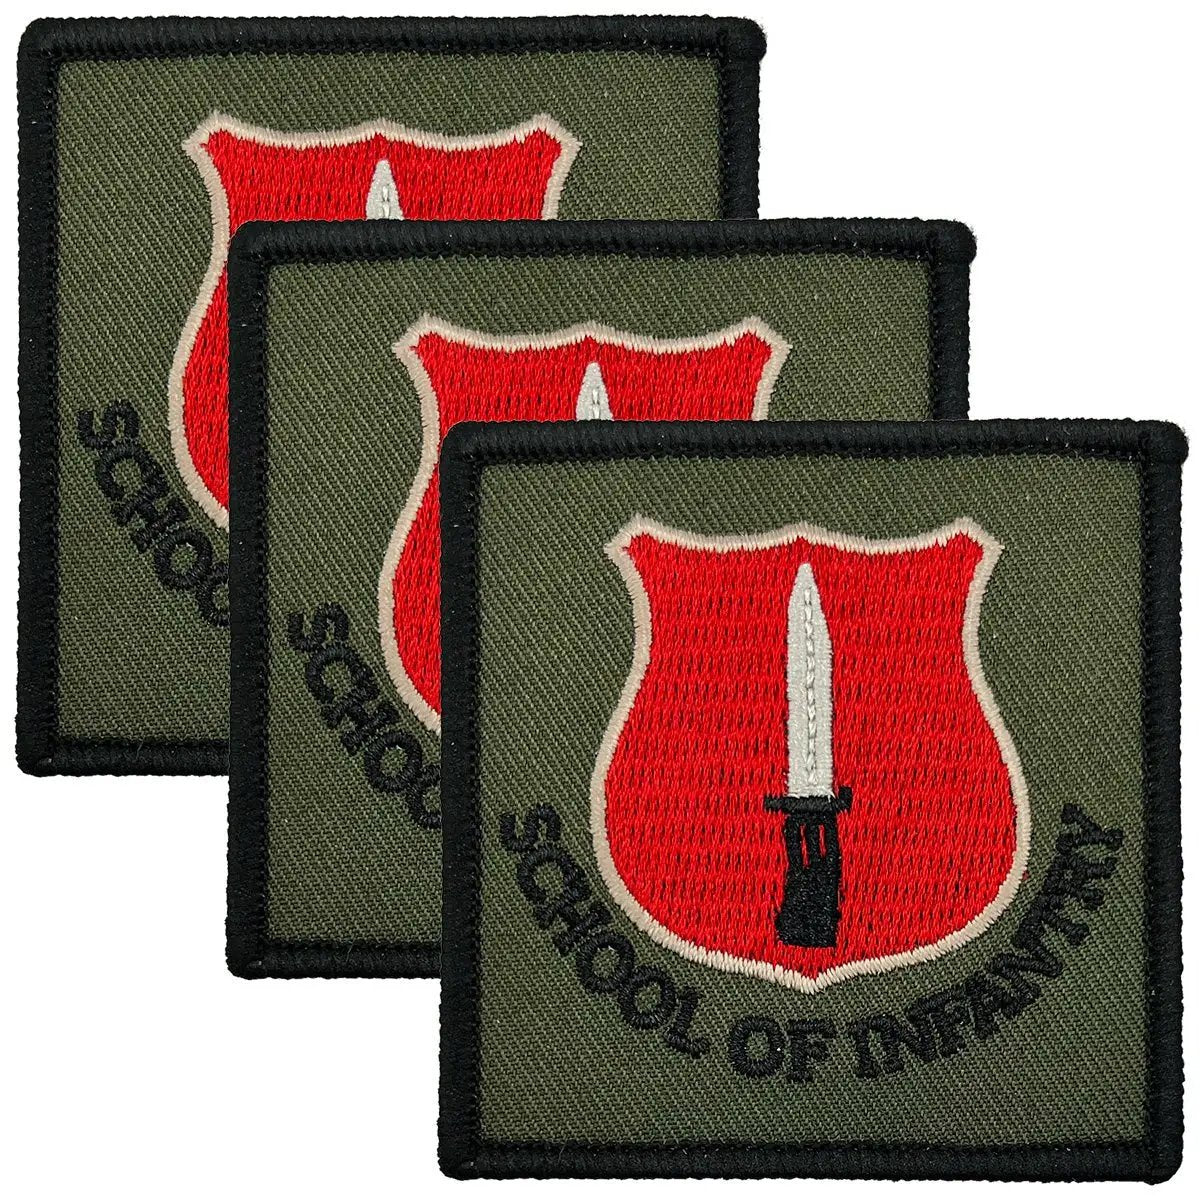 ITC School of Infantry Trade Recognition TRF - Iron or Sewn On Patch - John Bull Clothing